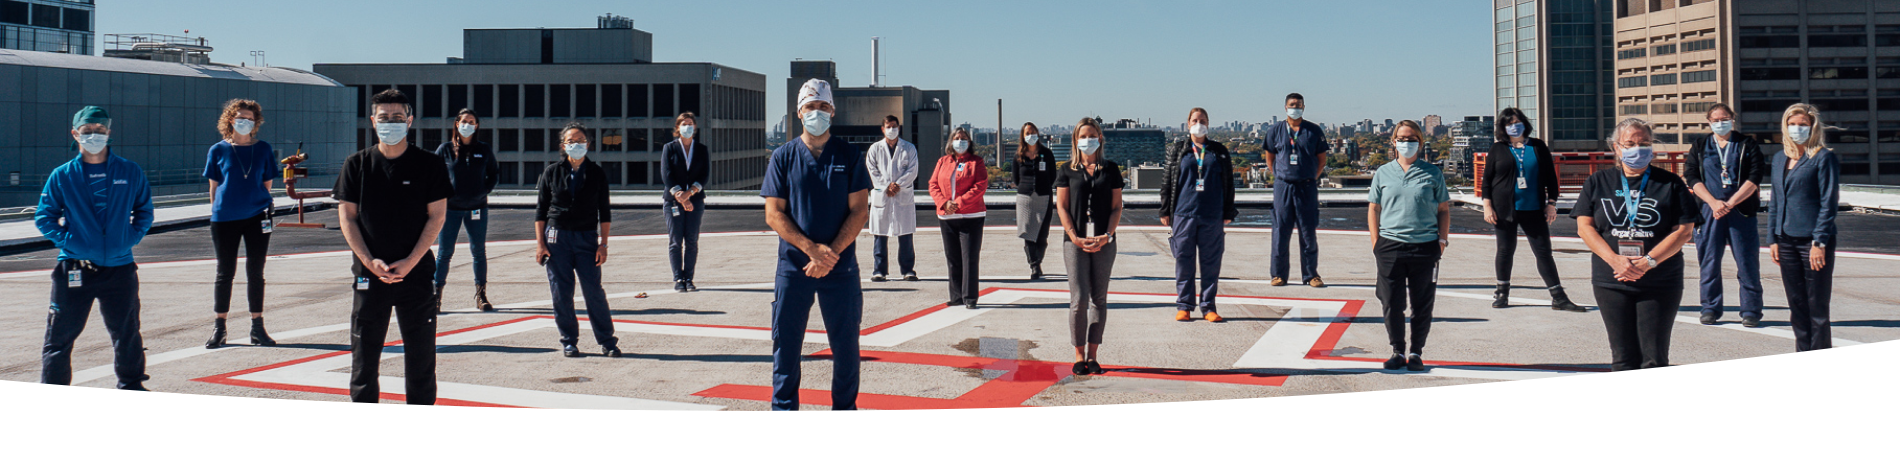 SickKids hospital workers standing on top of the emergency helicopter pad.